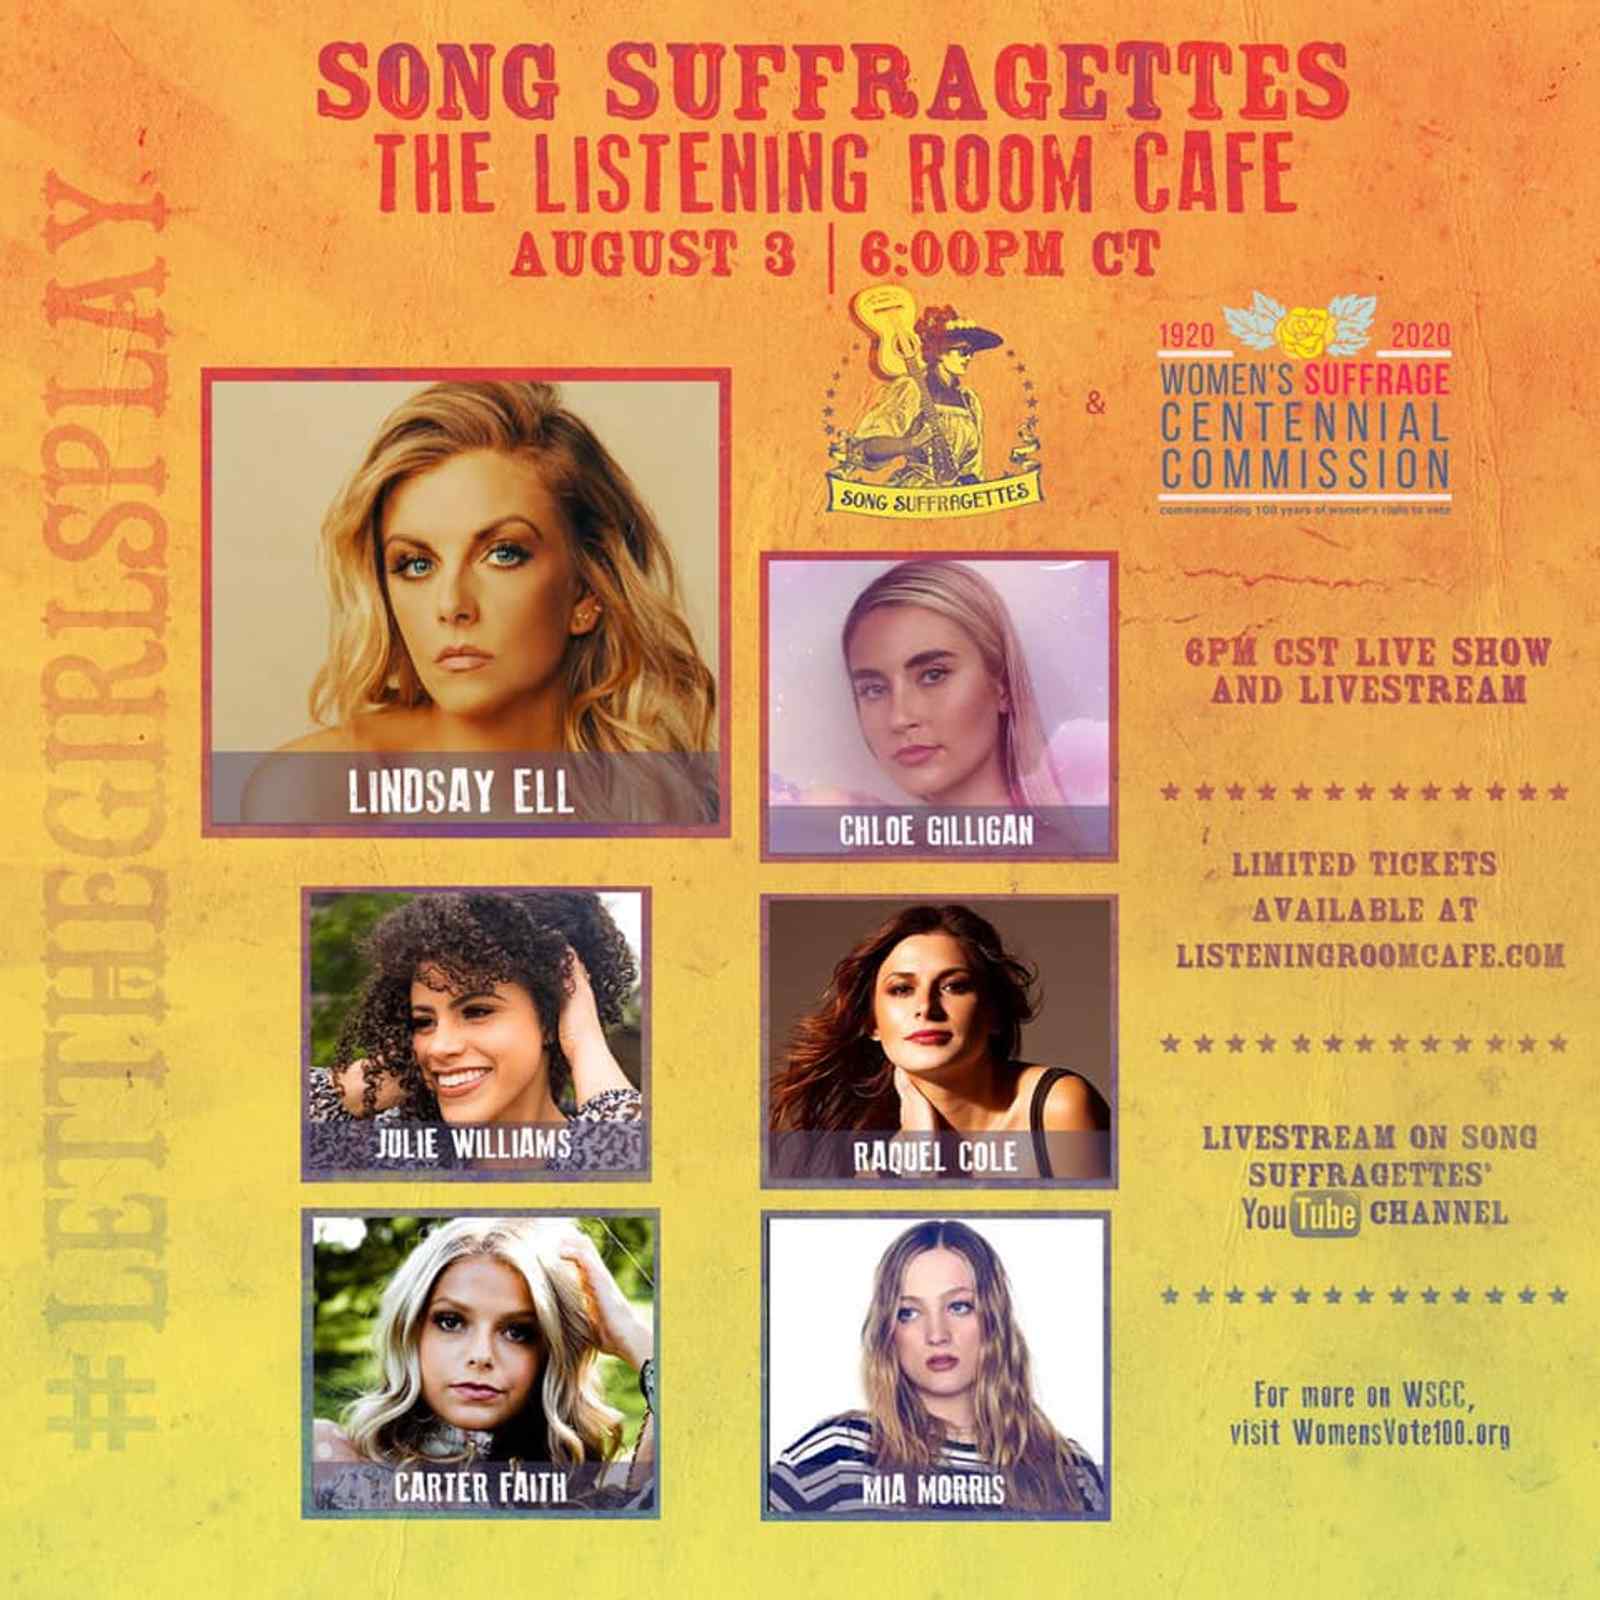 Song Suffragettes: The Listening Room Cafe with Lindsay Ell